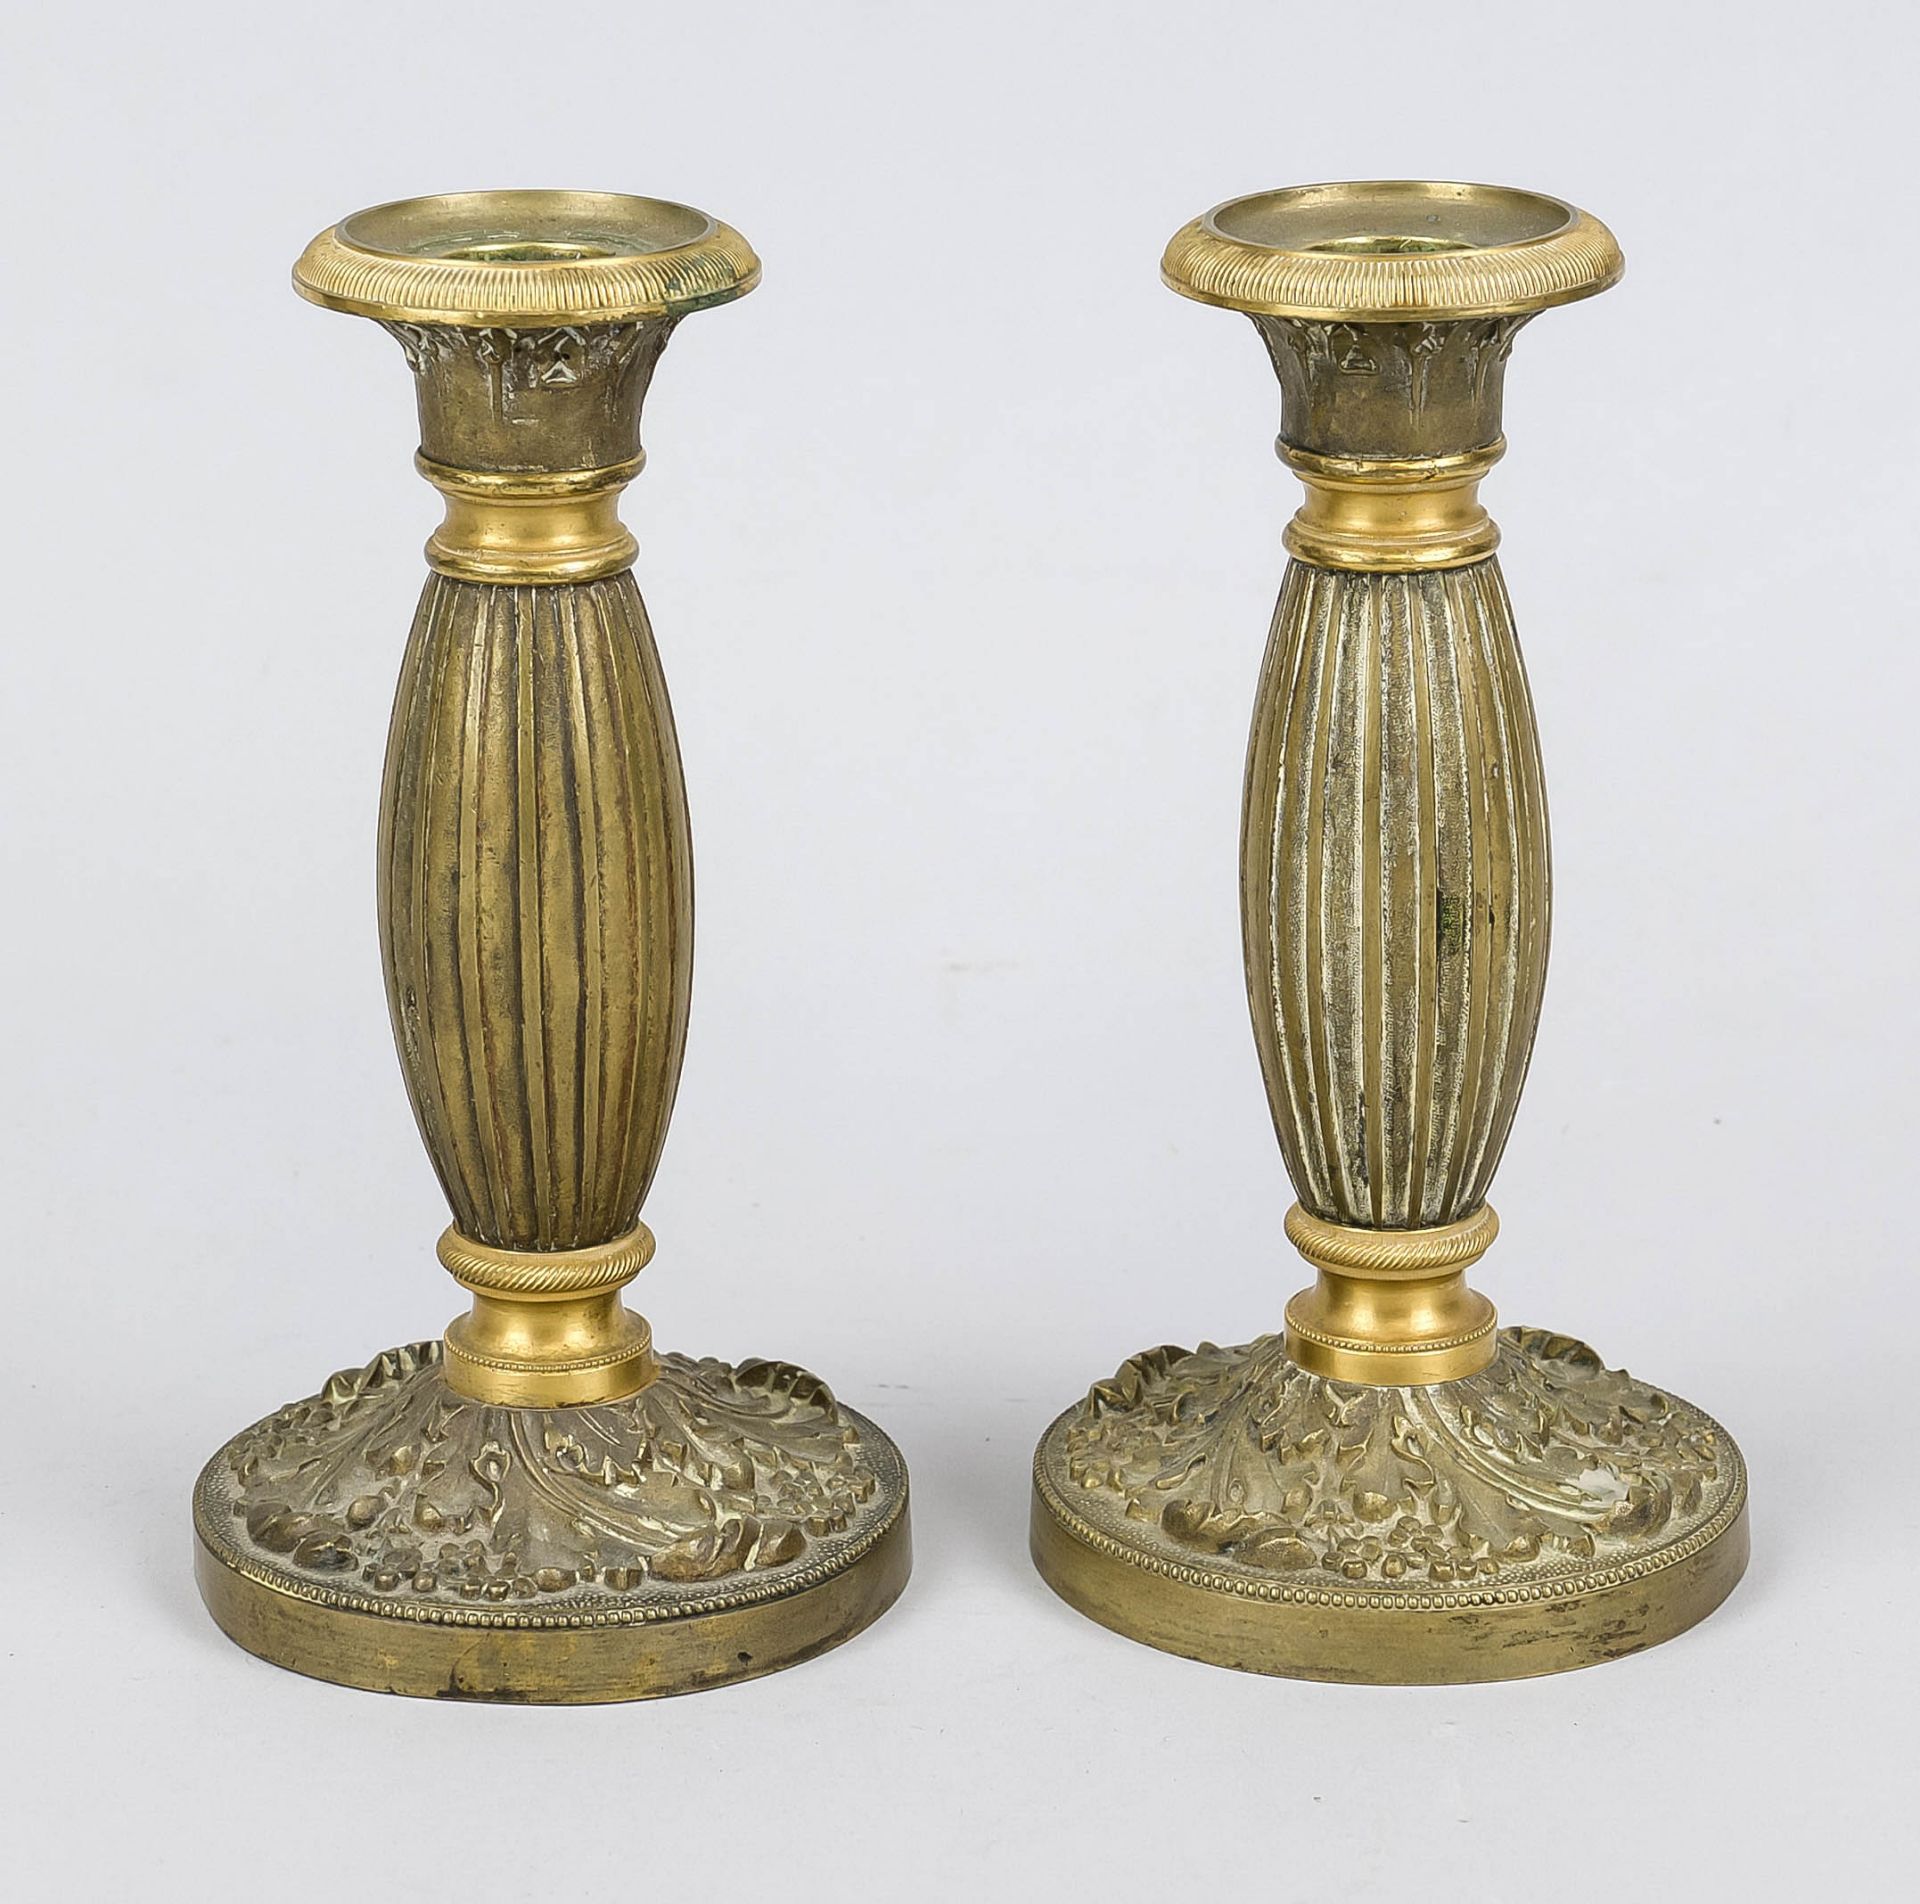 Pair of candlesticks, late 19th century, bronze/brass. Bulbous column shaft on ornamented foot, vase